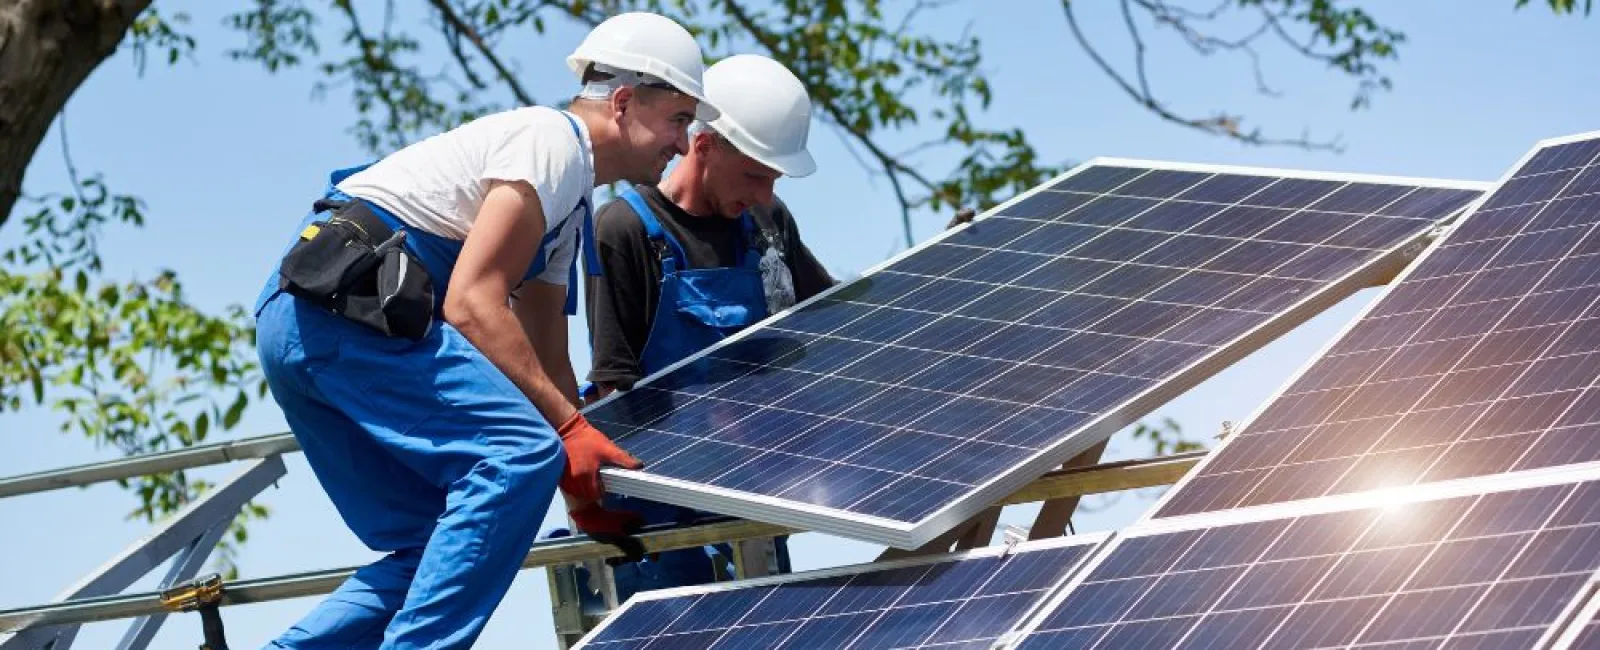 How To Decide if Solar Panels Are a Good Fit for Your Home